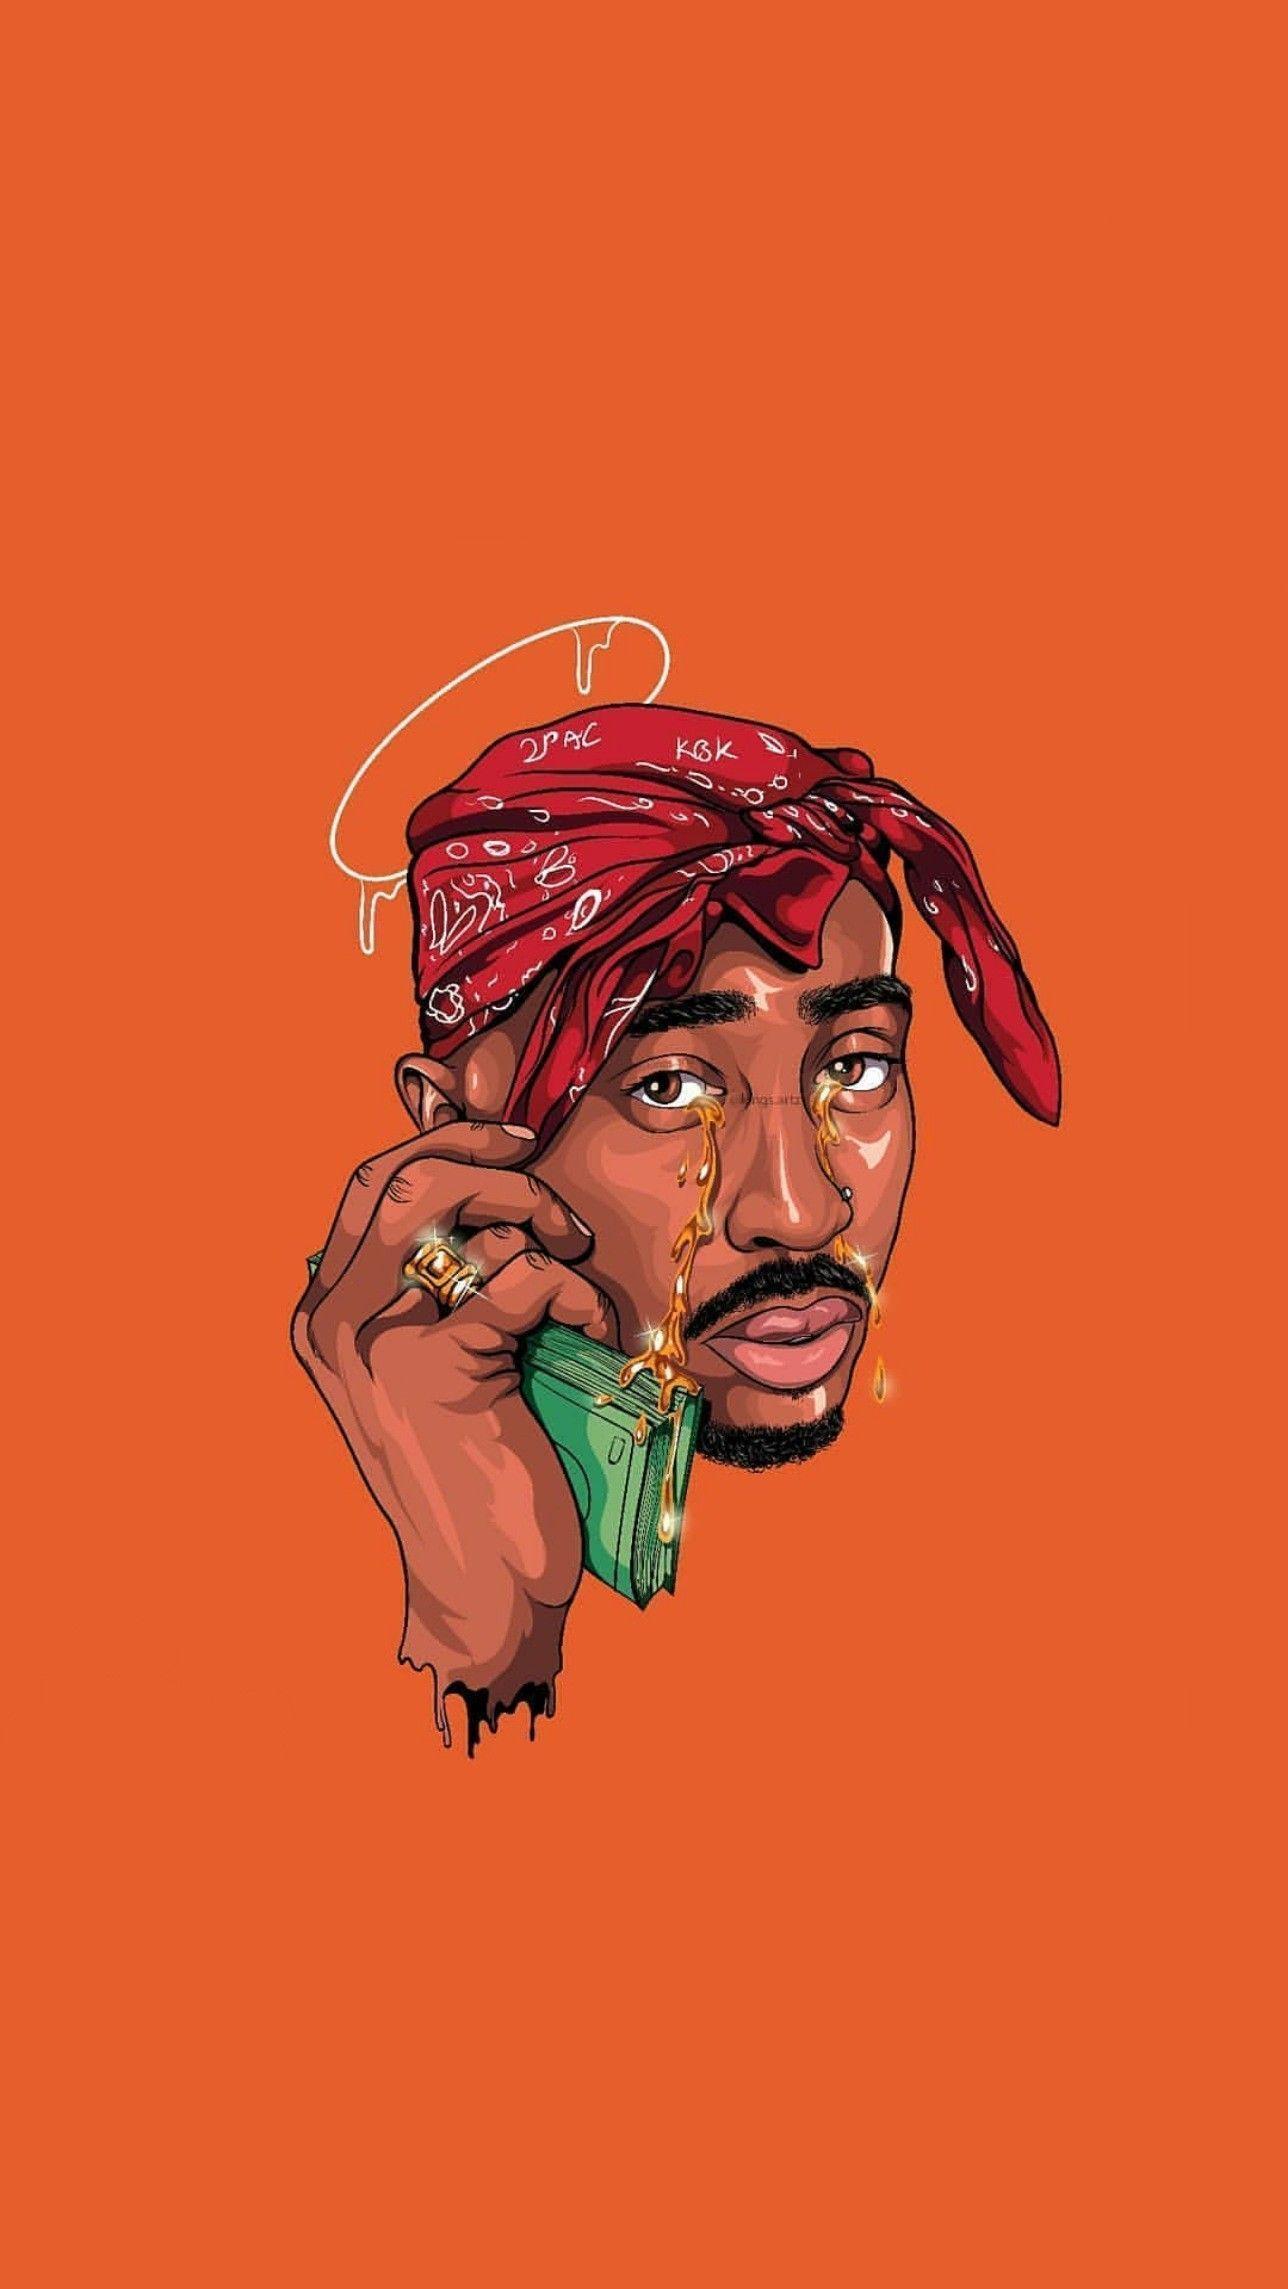 2Pac wallpaper by elayR  Download on ZEDGE  8126